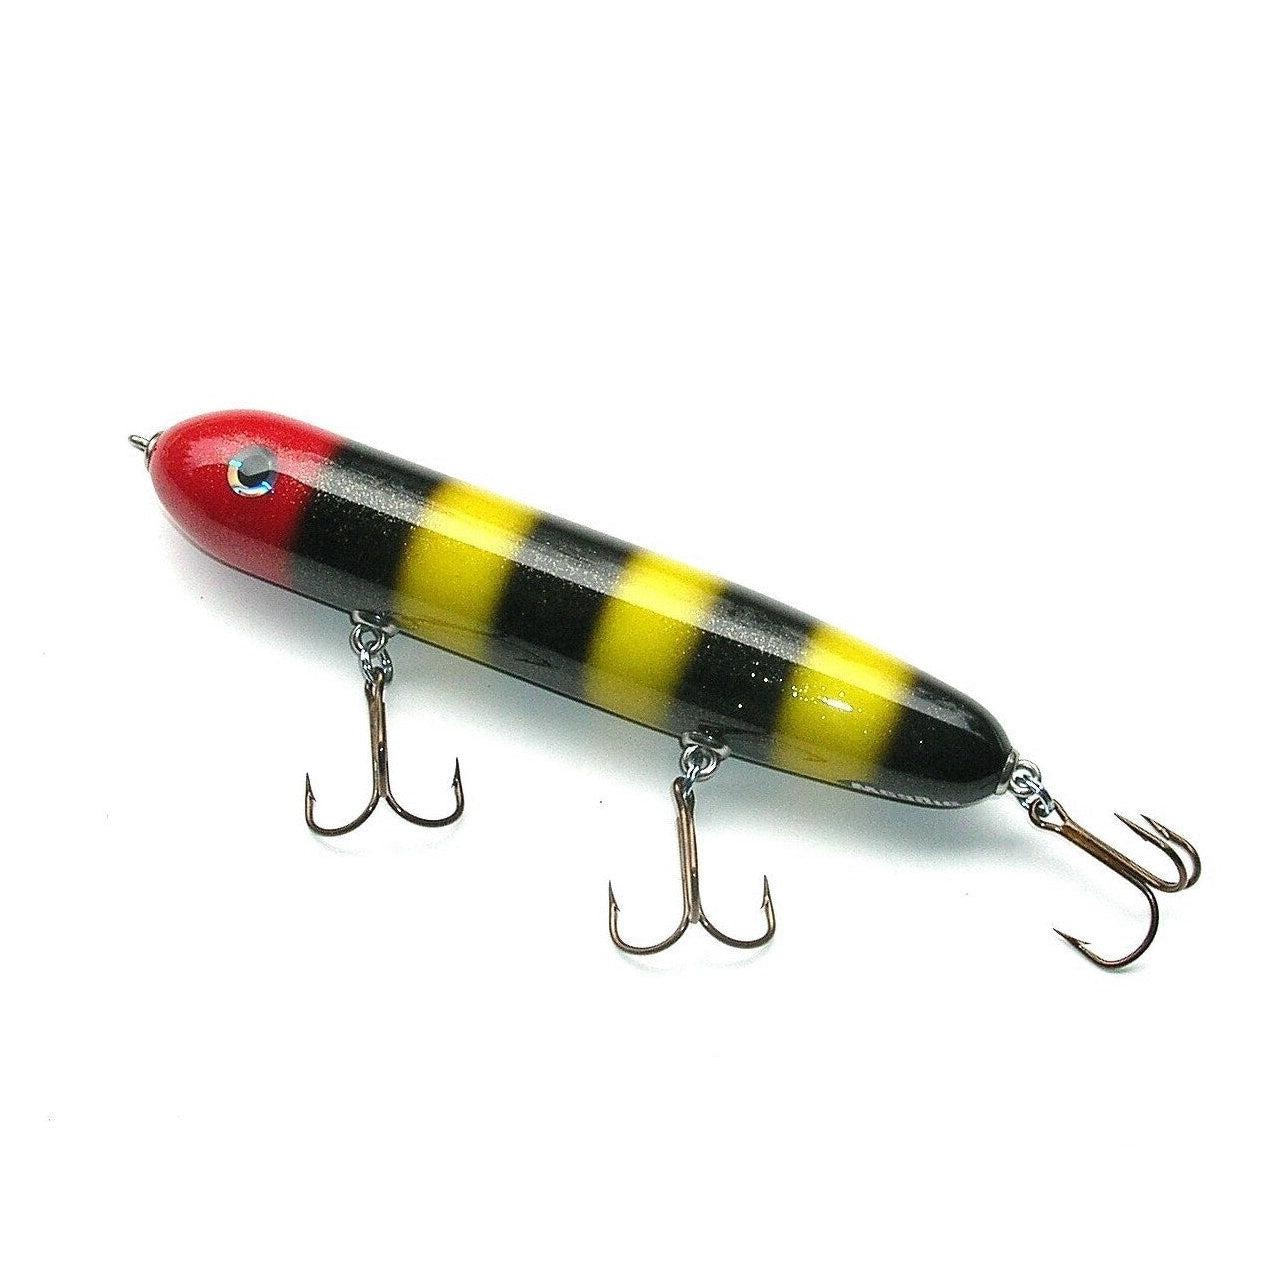 View of Topwater Suick Weagle 8" Topwater Jailbird available at EZOKO Pike and Musky Shop